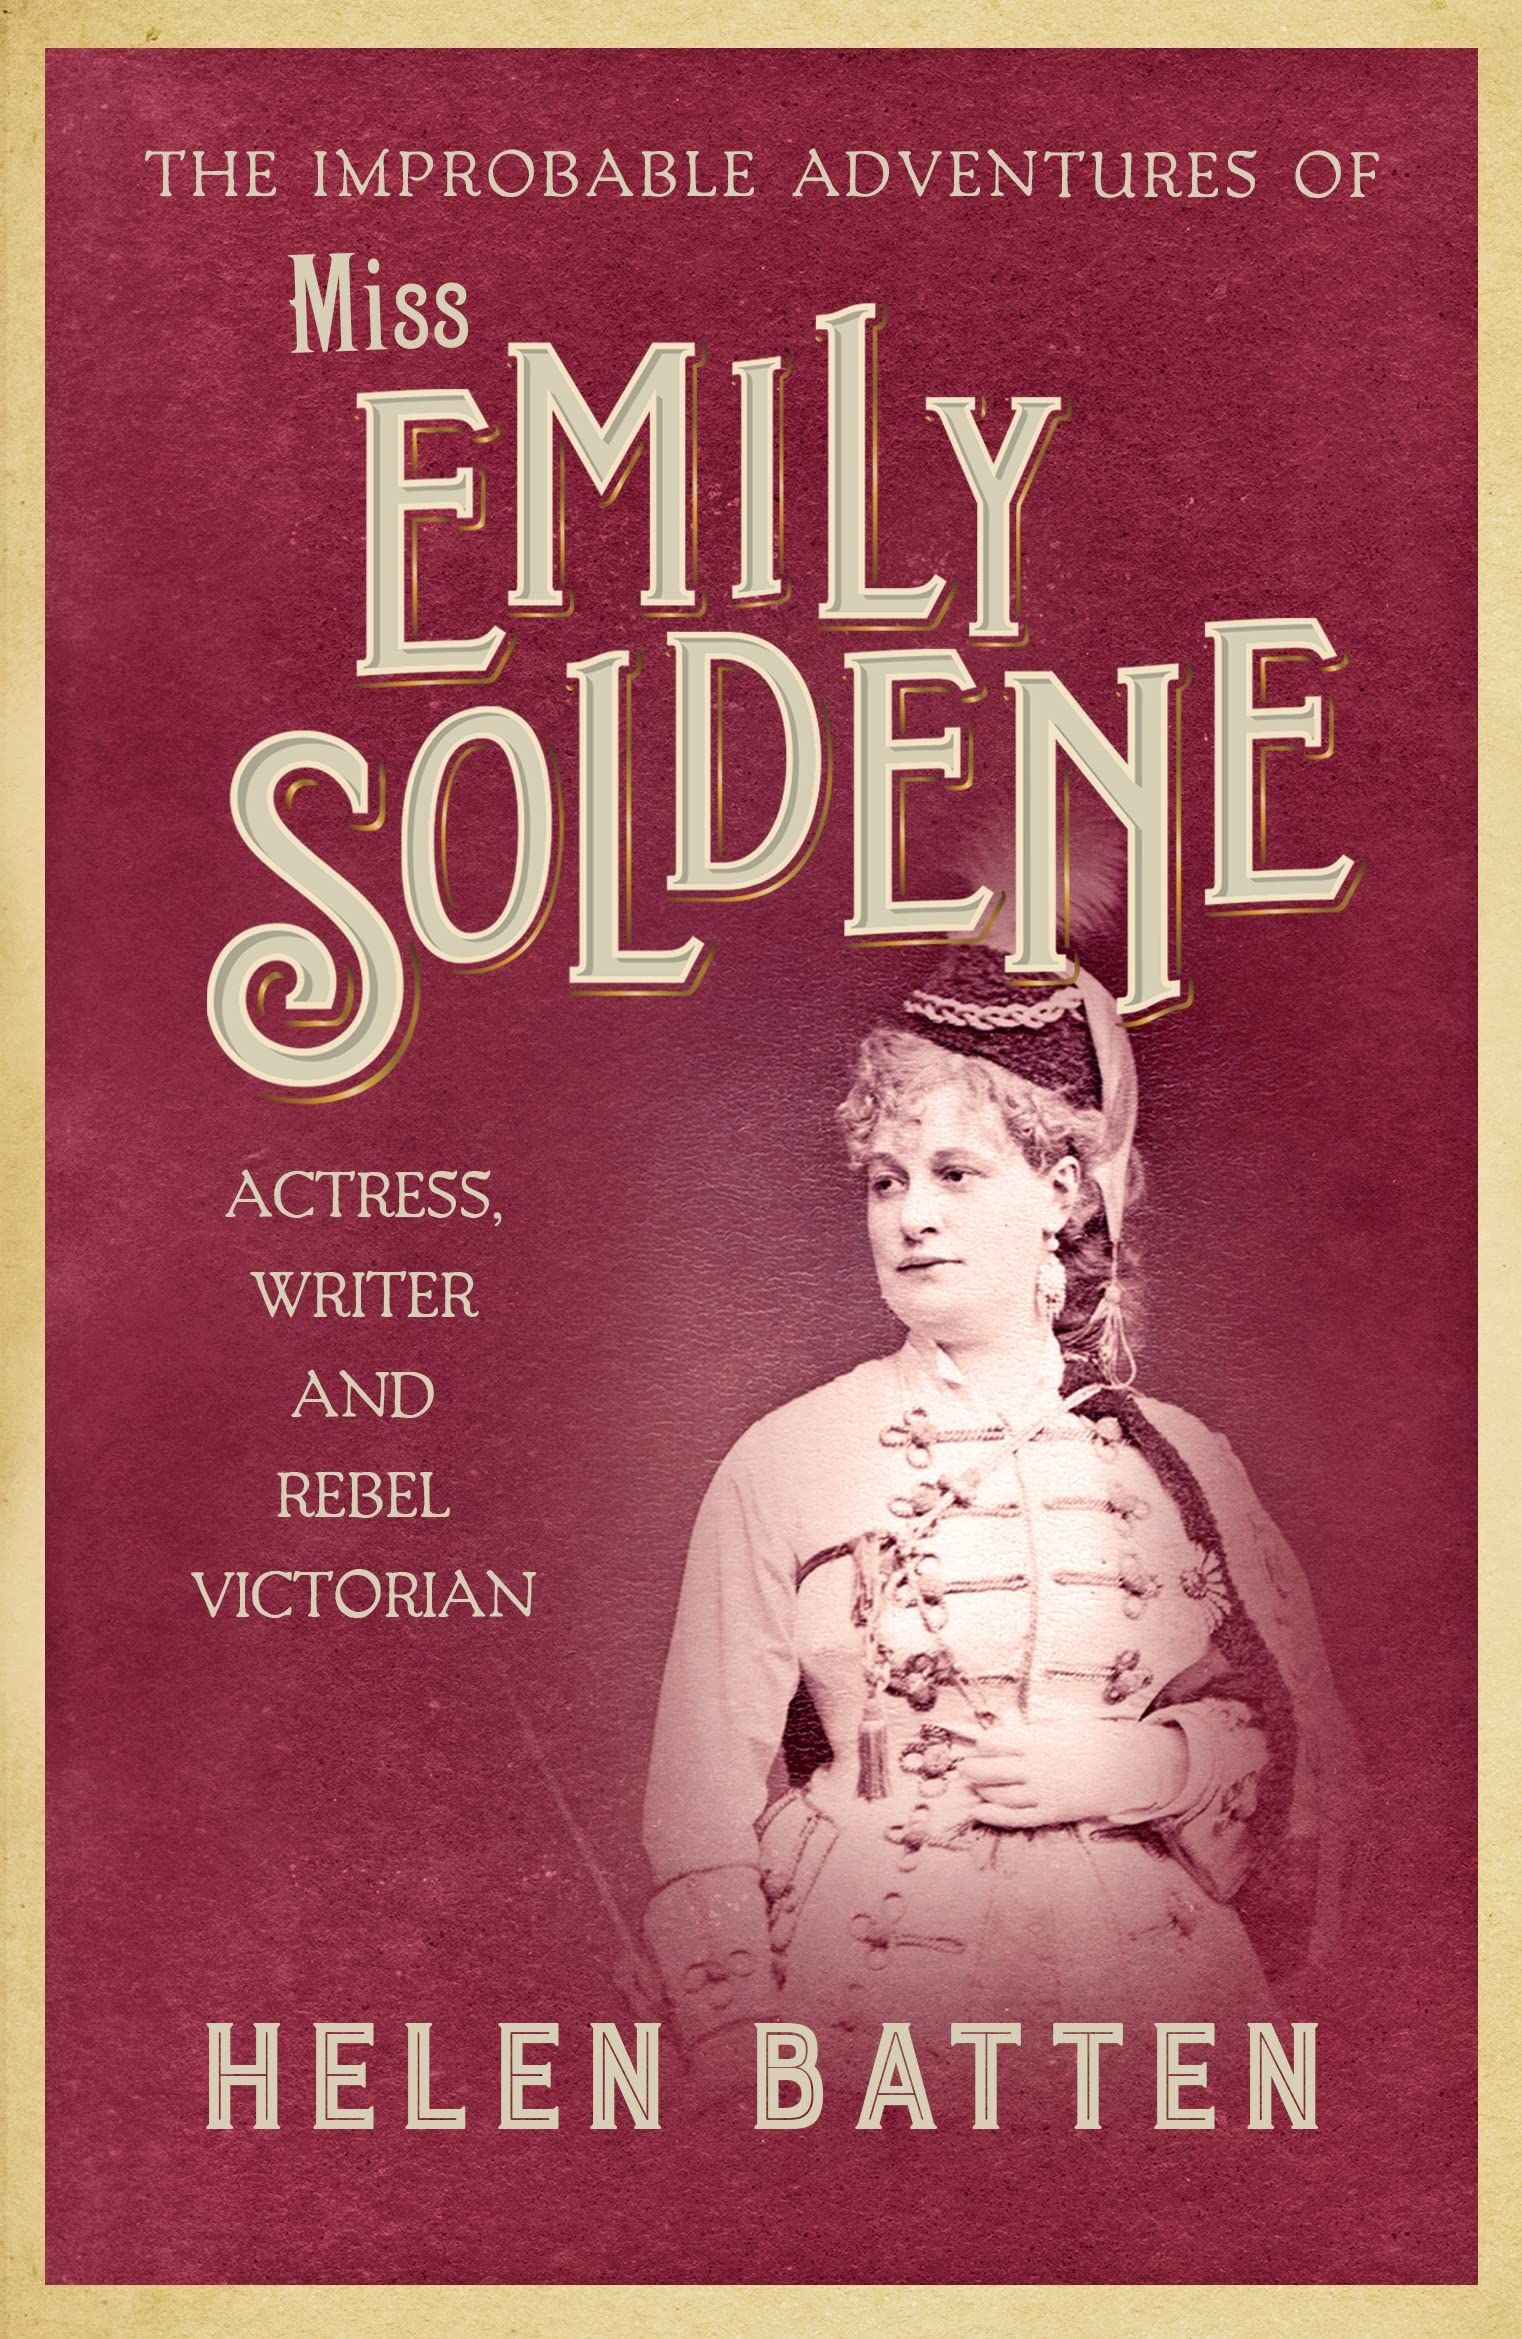 The Improbable Adventures of Miss Emily Soldene : Actress, Writer, and Rebel Victorian